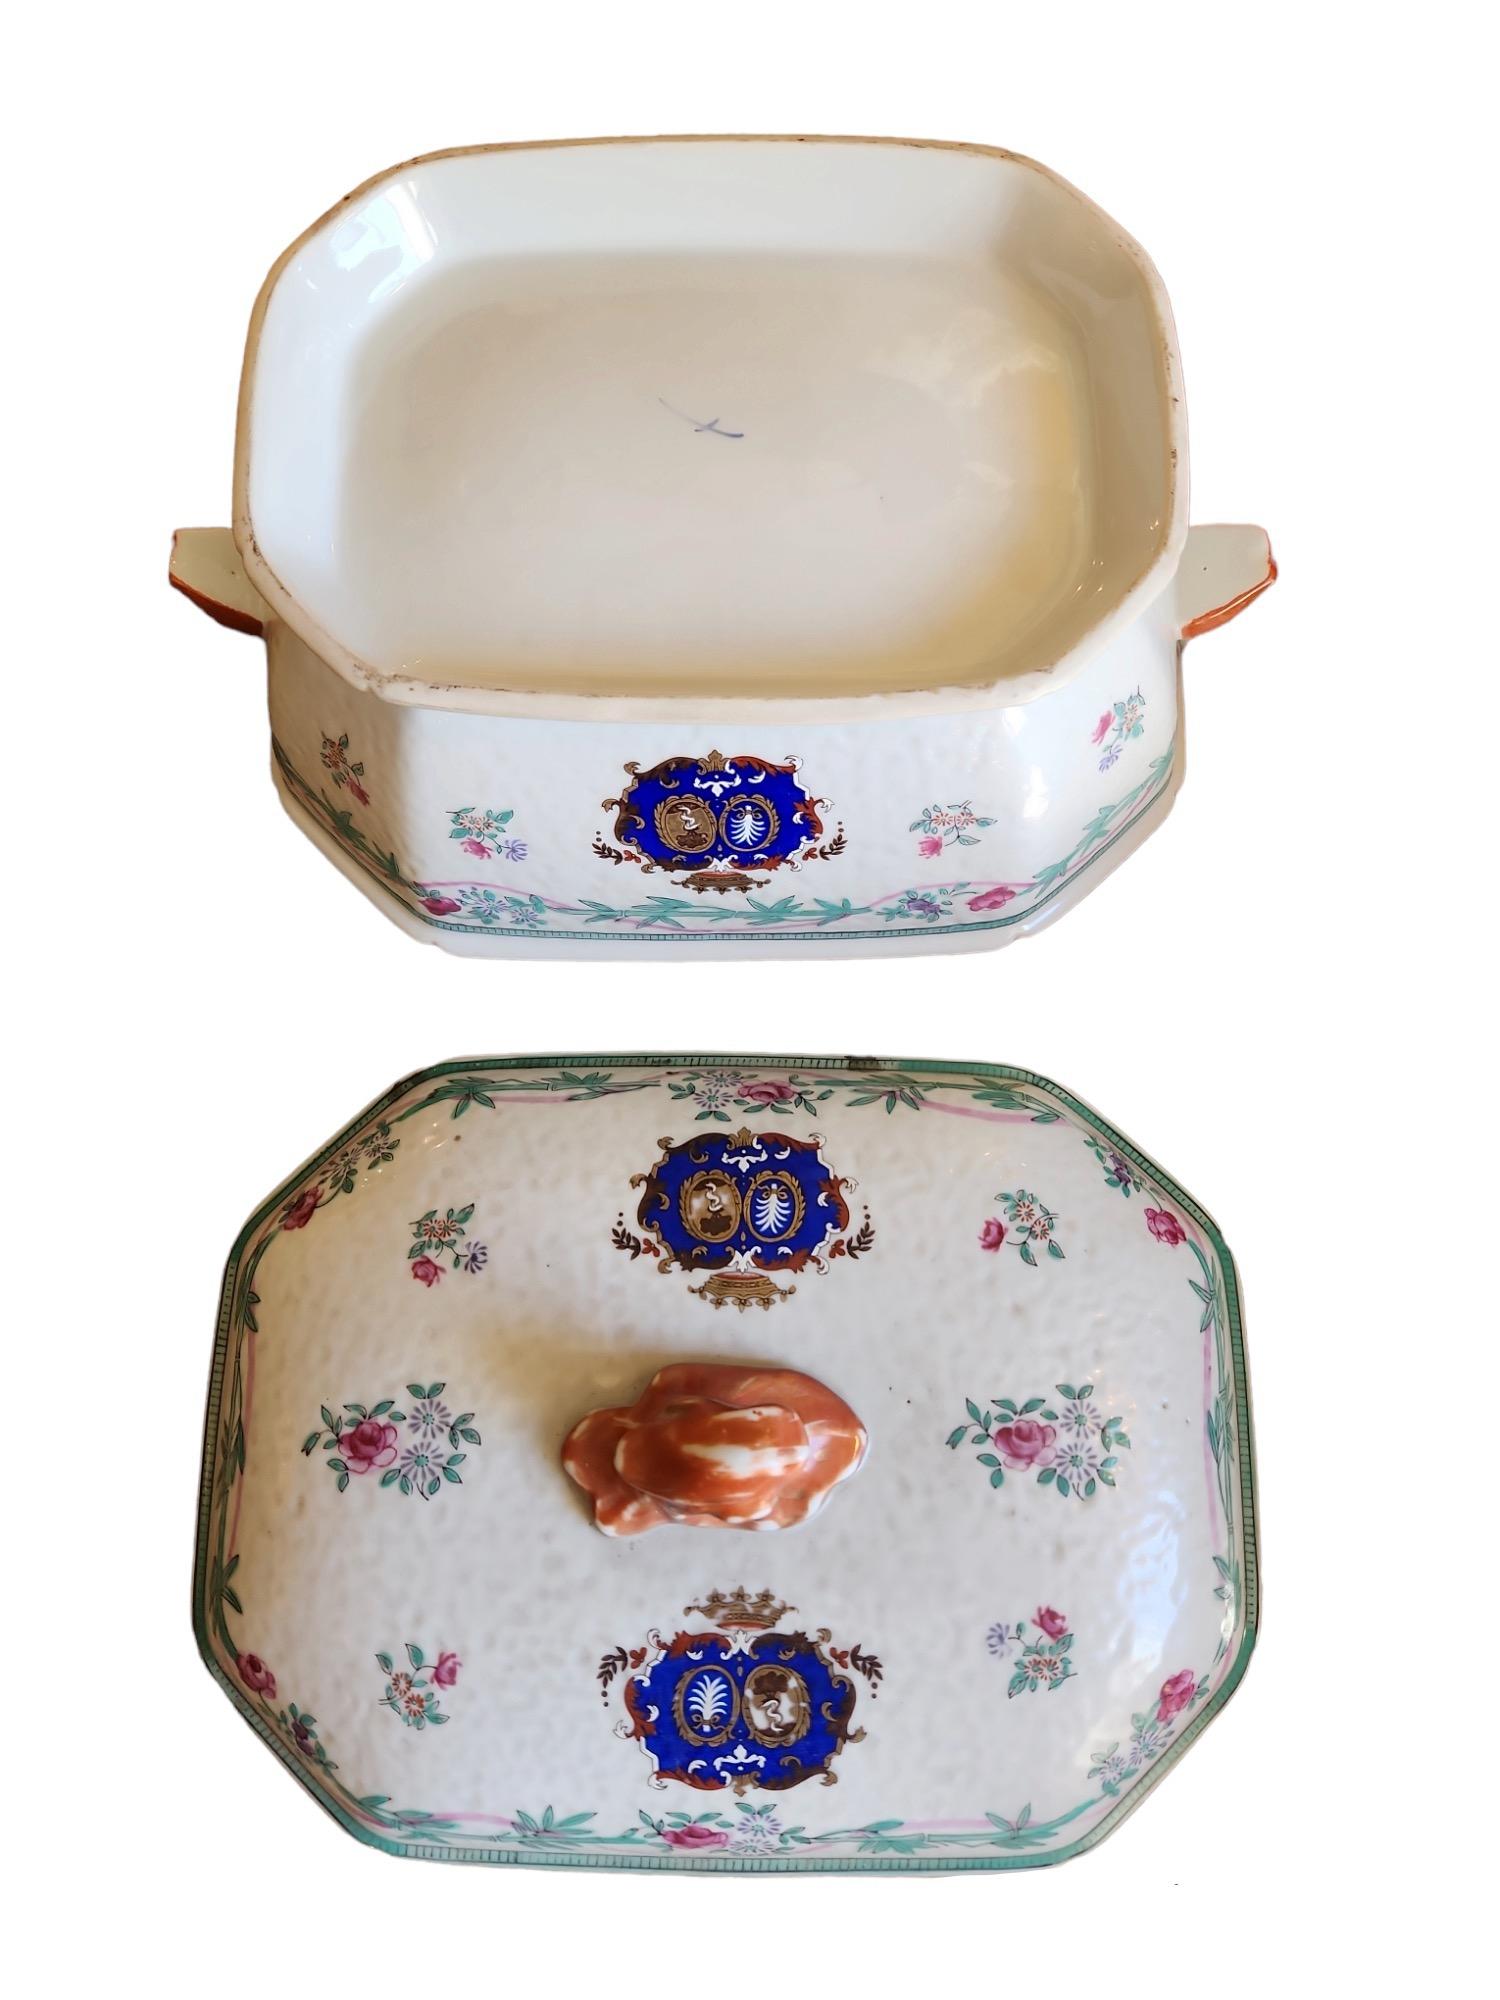 Porcelain 19th Century Chinese Export Tureen and Platter